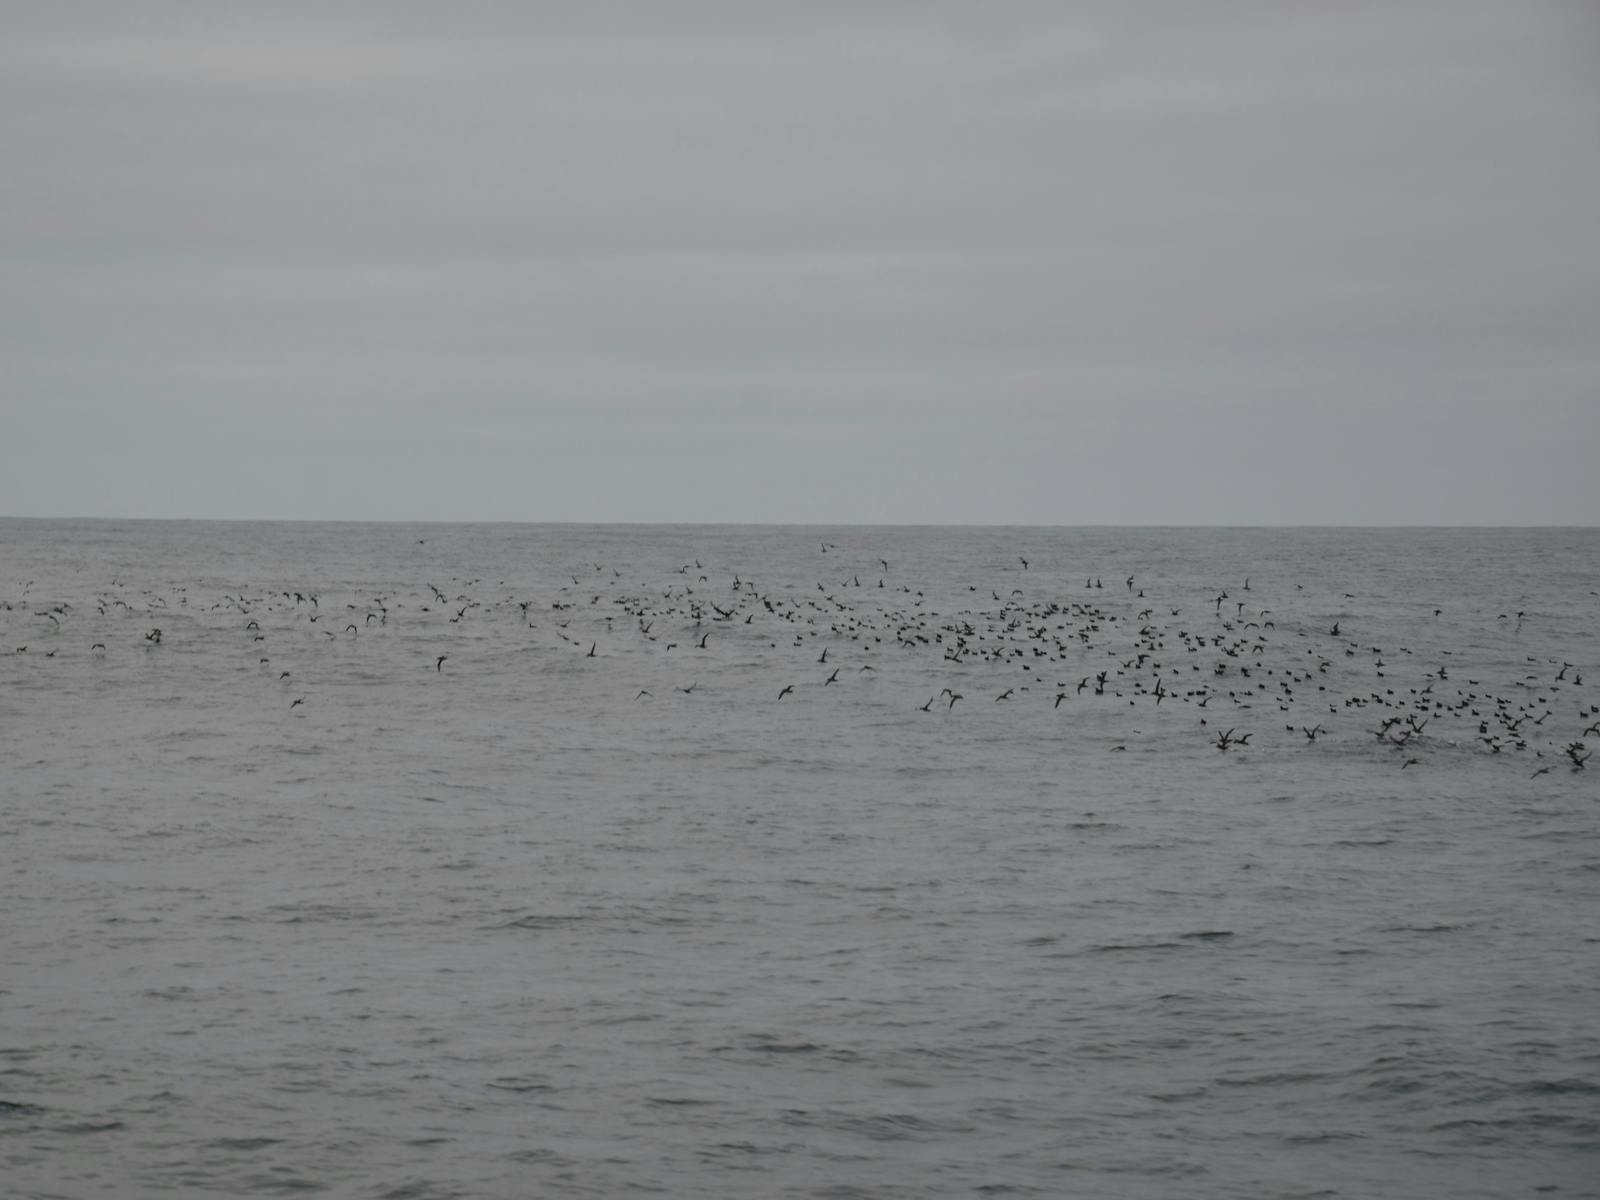 Shearwaters over the ocean